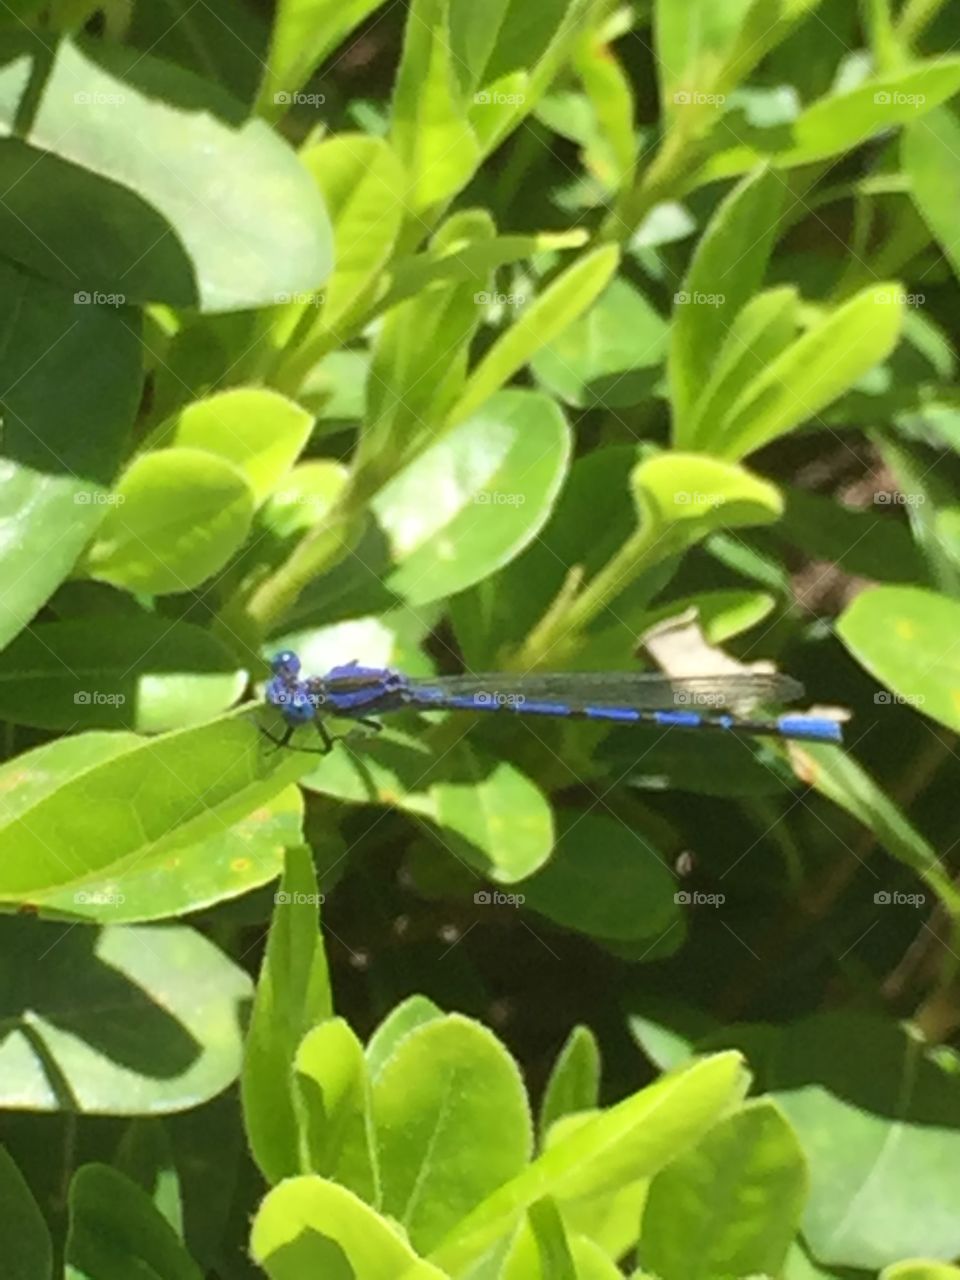 A blue dragon staring at me will chilling  at the pond in a LA park.